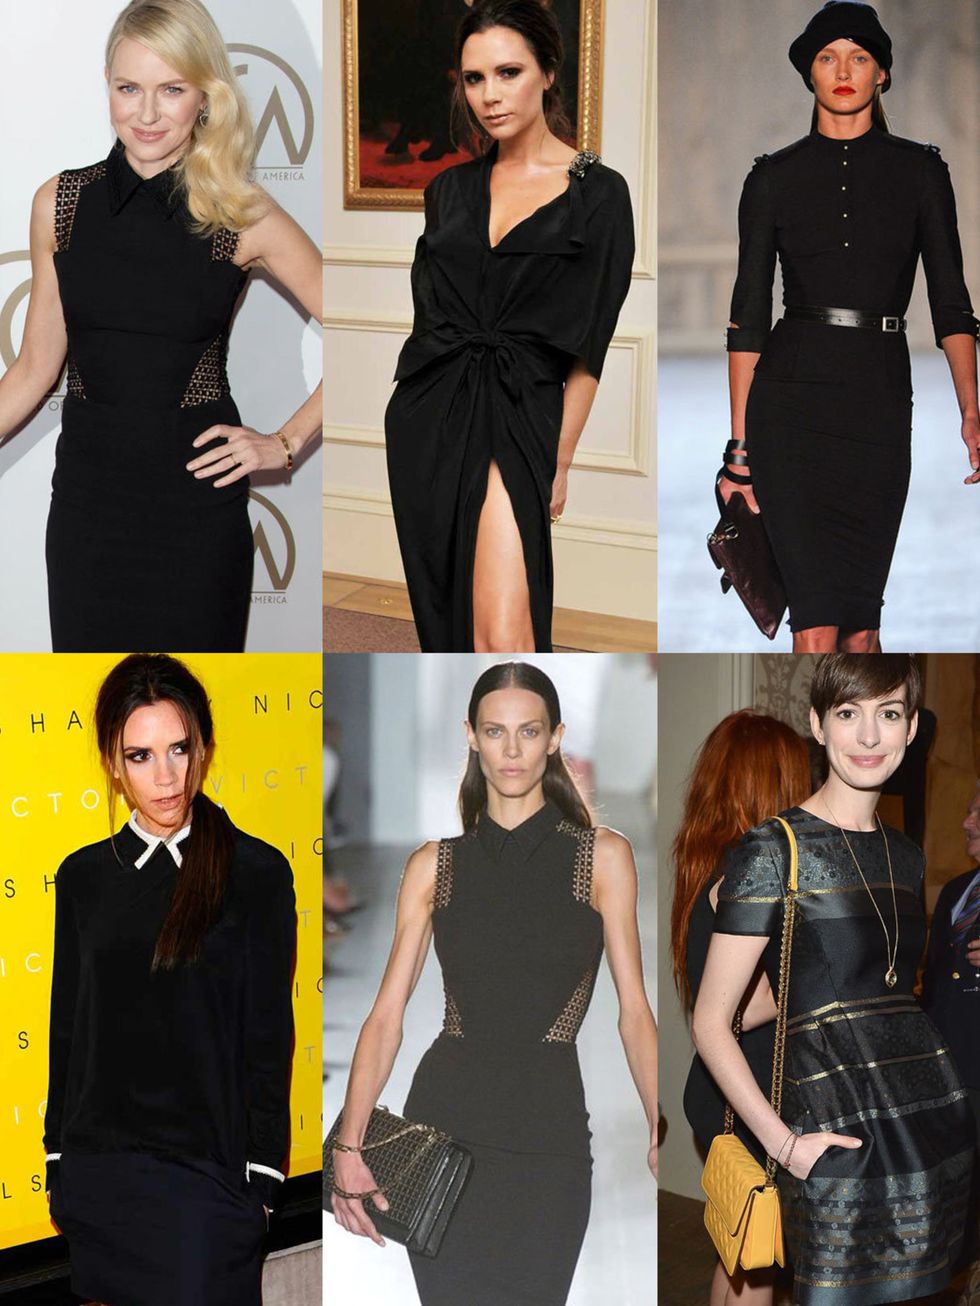 <p>Can anyone remember what Victoria Beckham did before she conquered the fashion world? Something about a girl band? Its all ancient history now  she is now designer through and through, running a label respected by the fashion industry, loved by the A